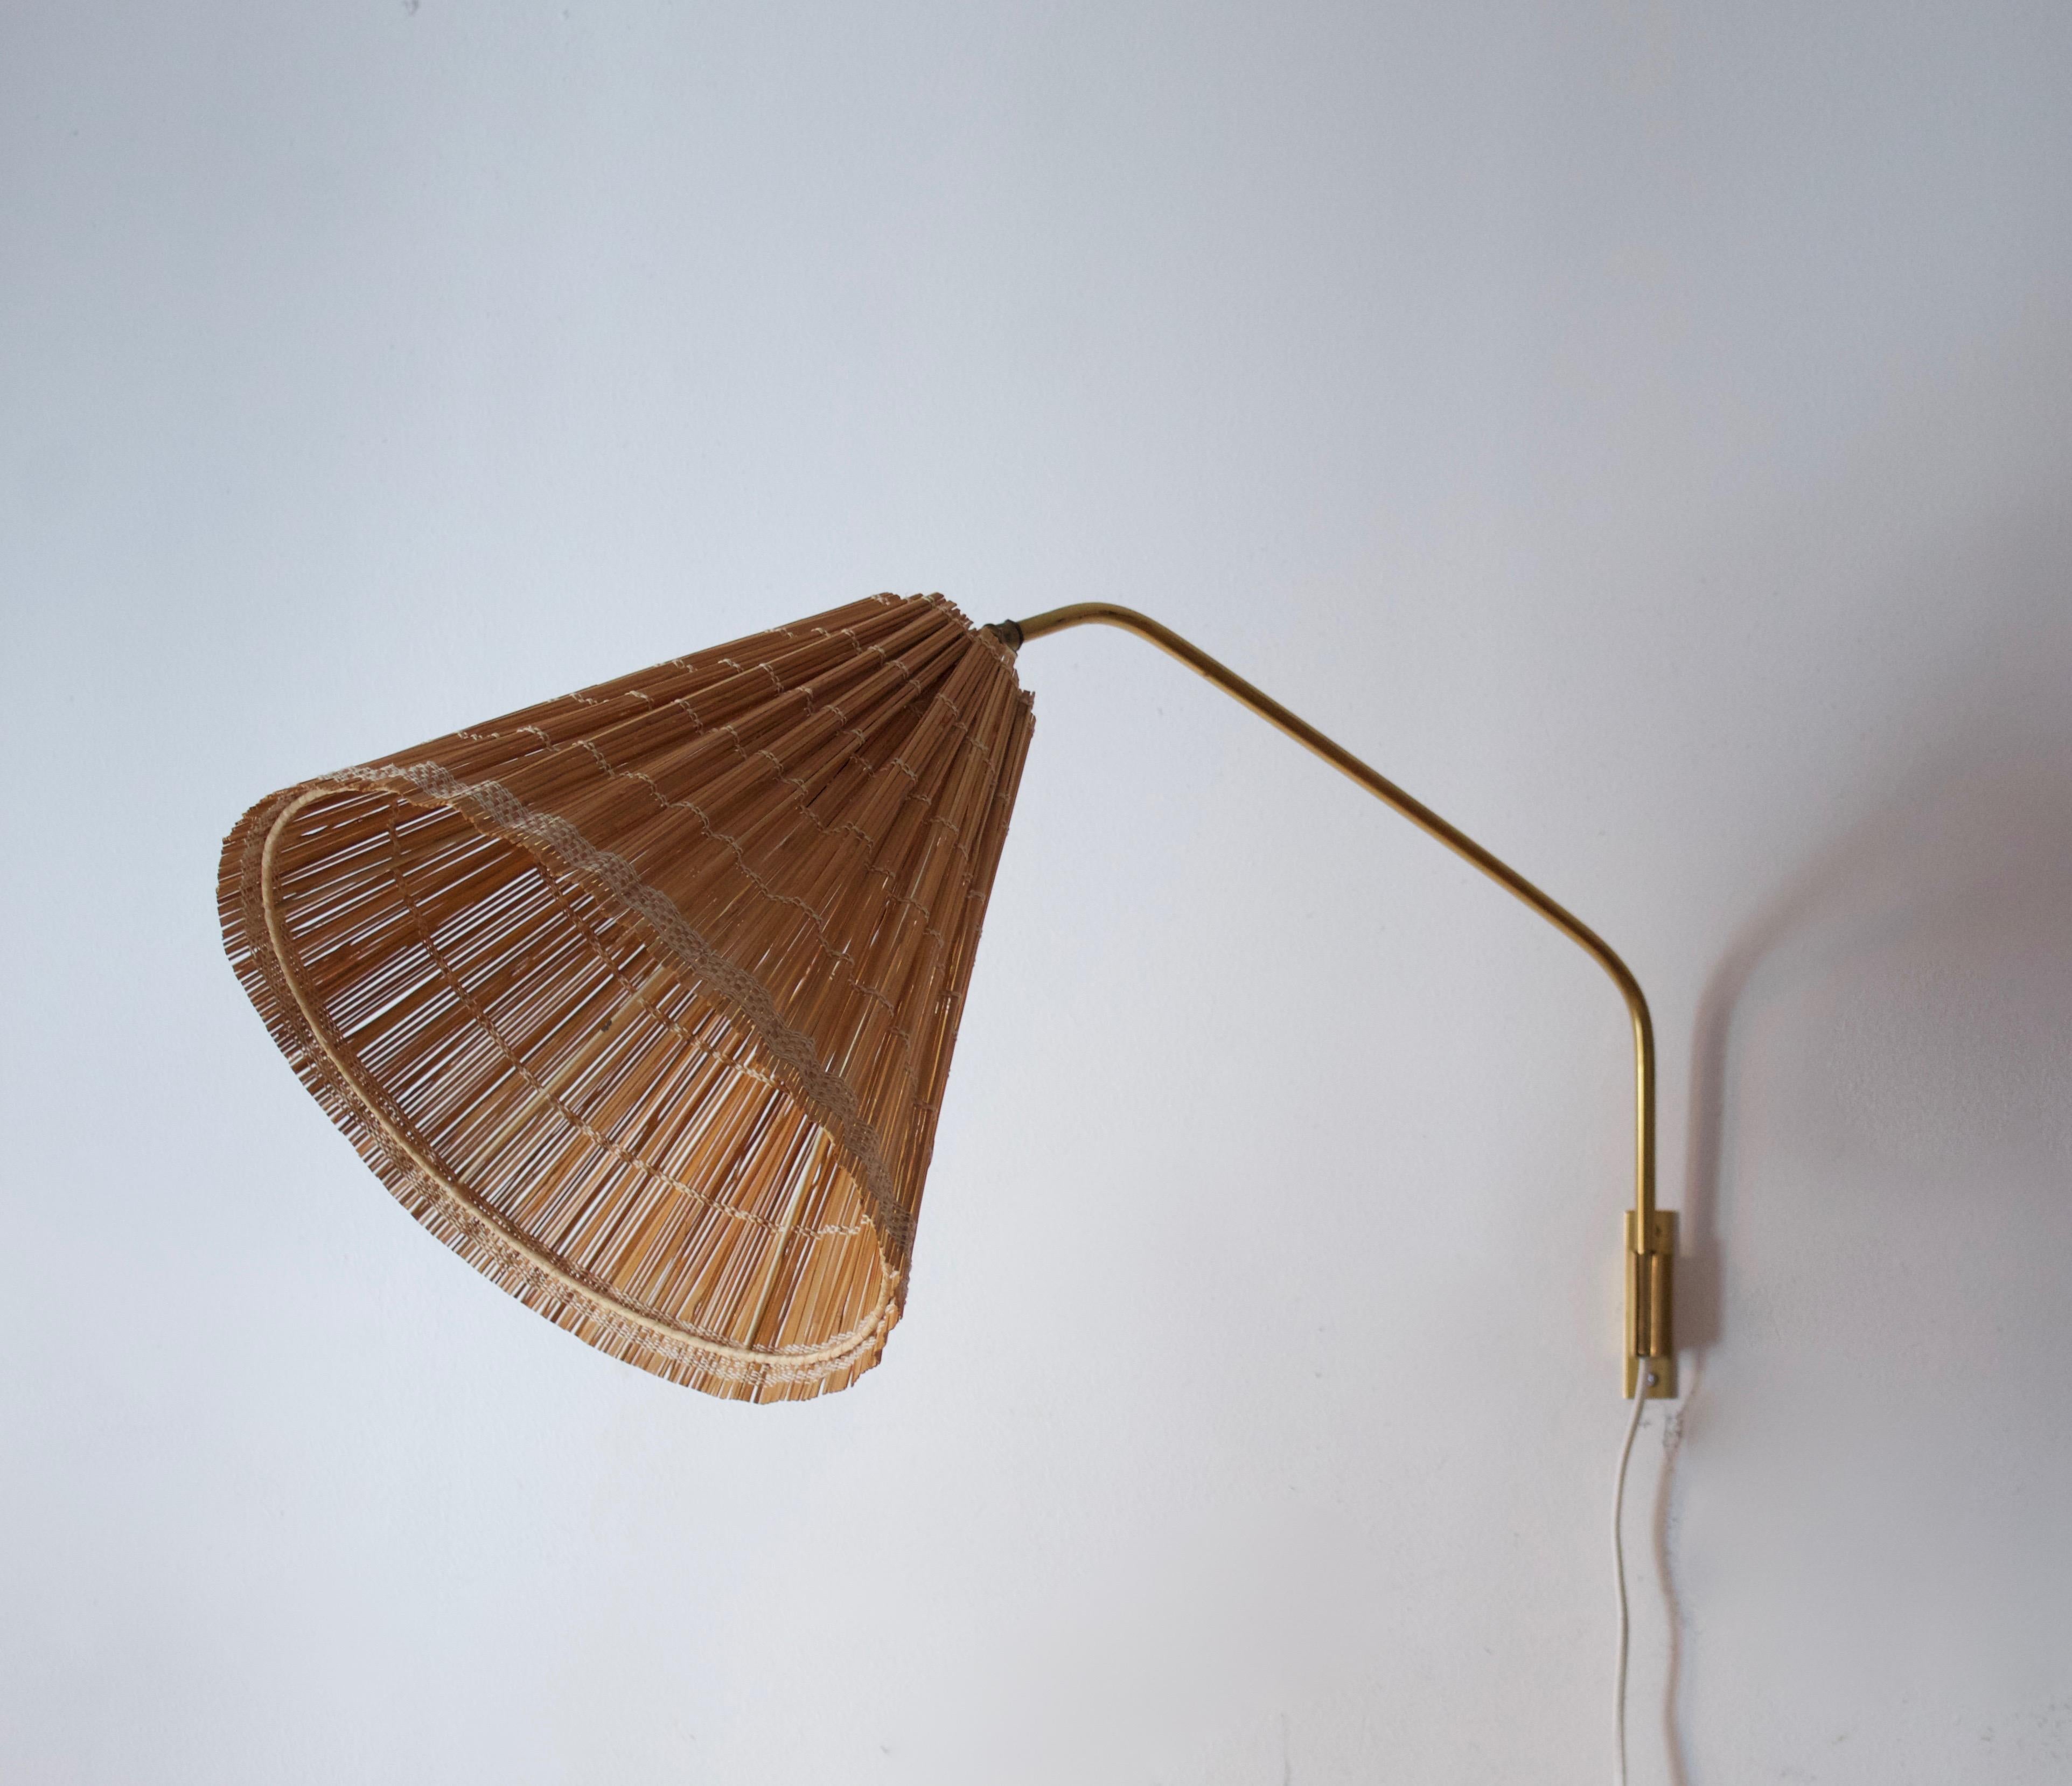 An adjustable wall light designed by Lisa Johansson-Pape in 1950. Produced by Ornö, Kerava, Finland. Stamped with makers mark.

Other designers of the period include Paavo Tynell, Josef Frank, Ilmari Tapiovaara, and Alvar Aalto.